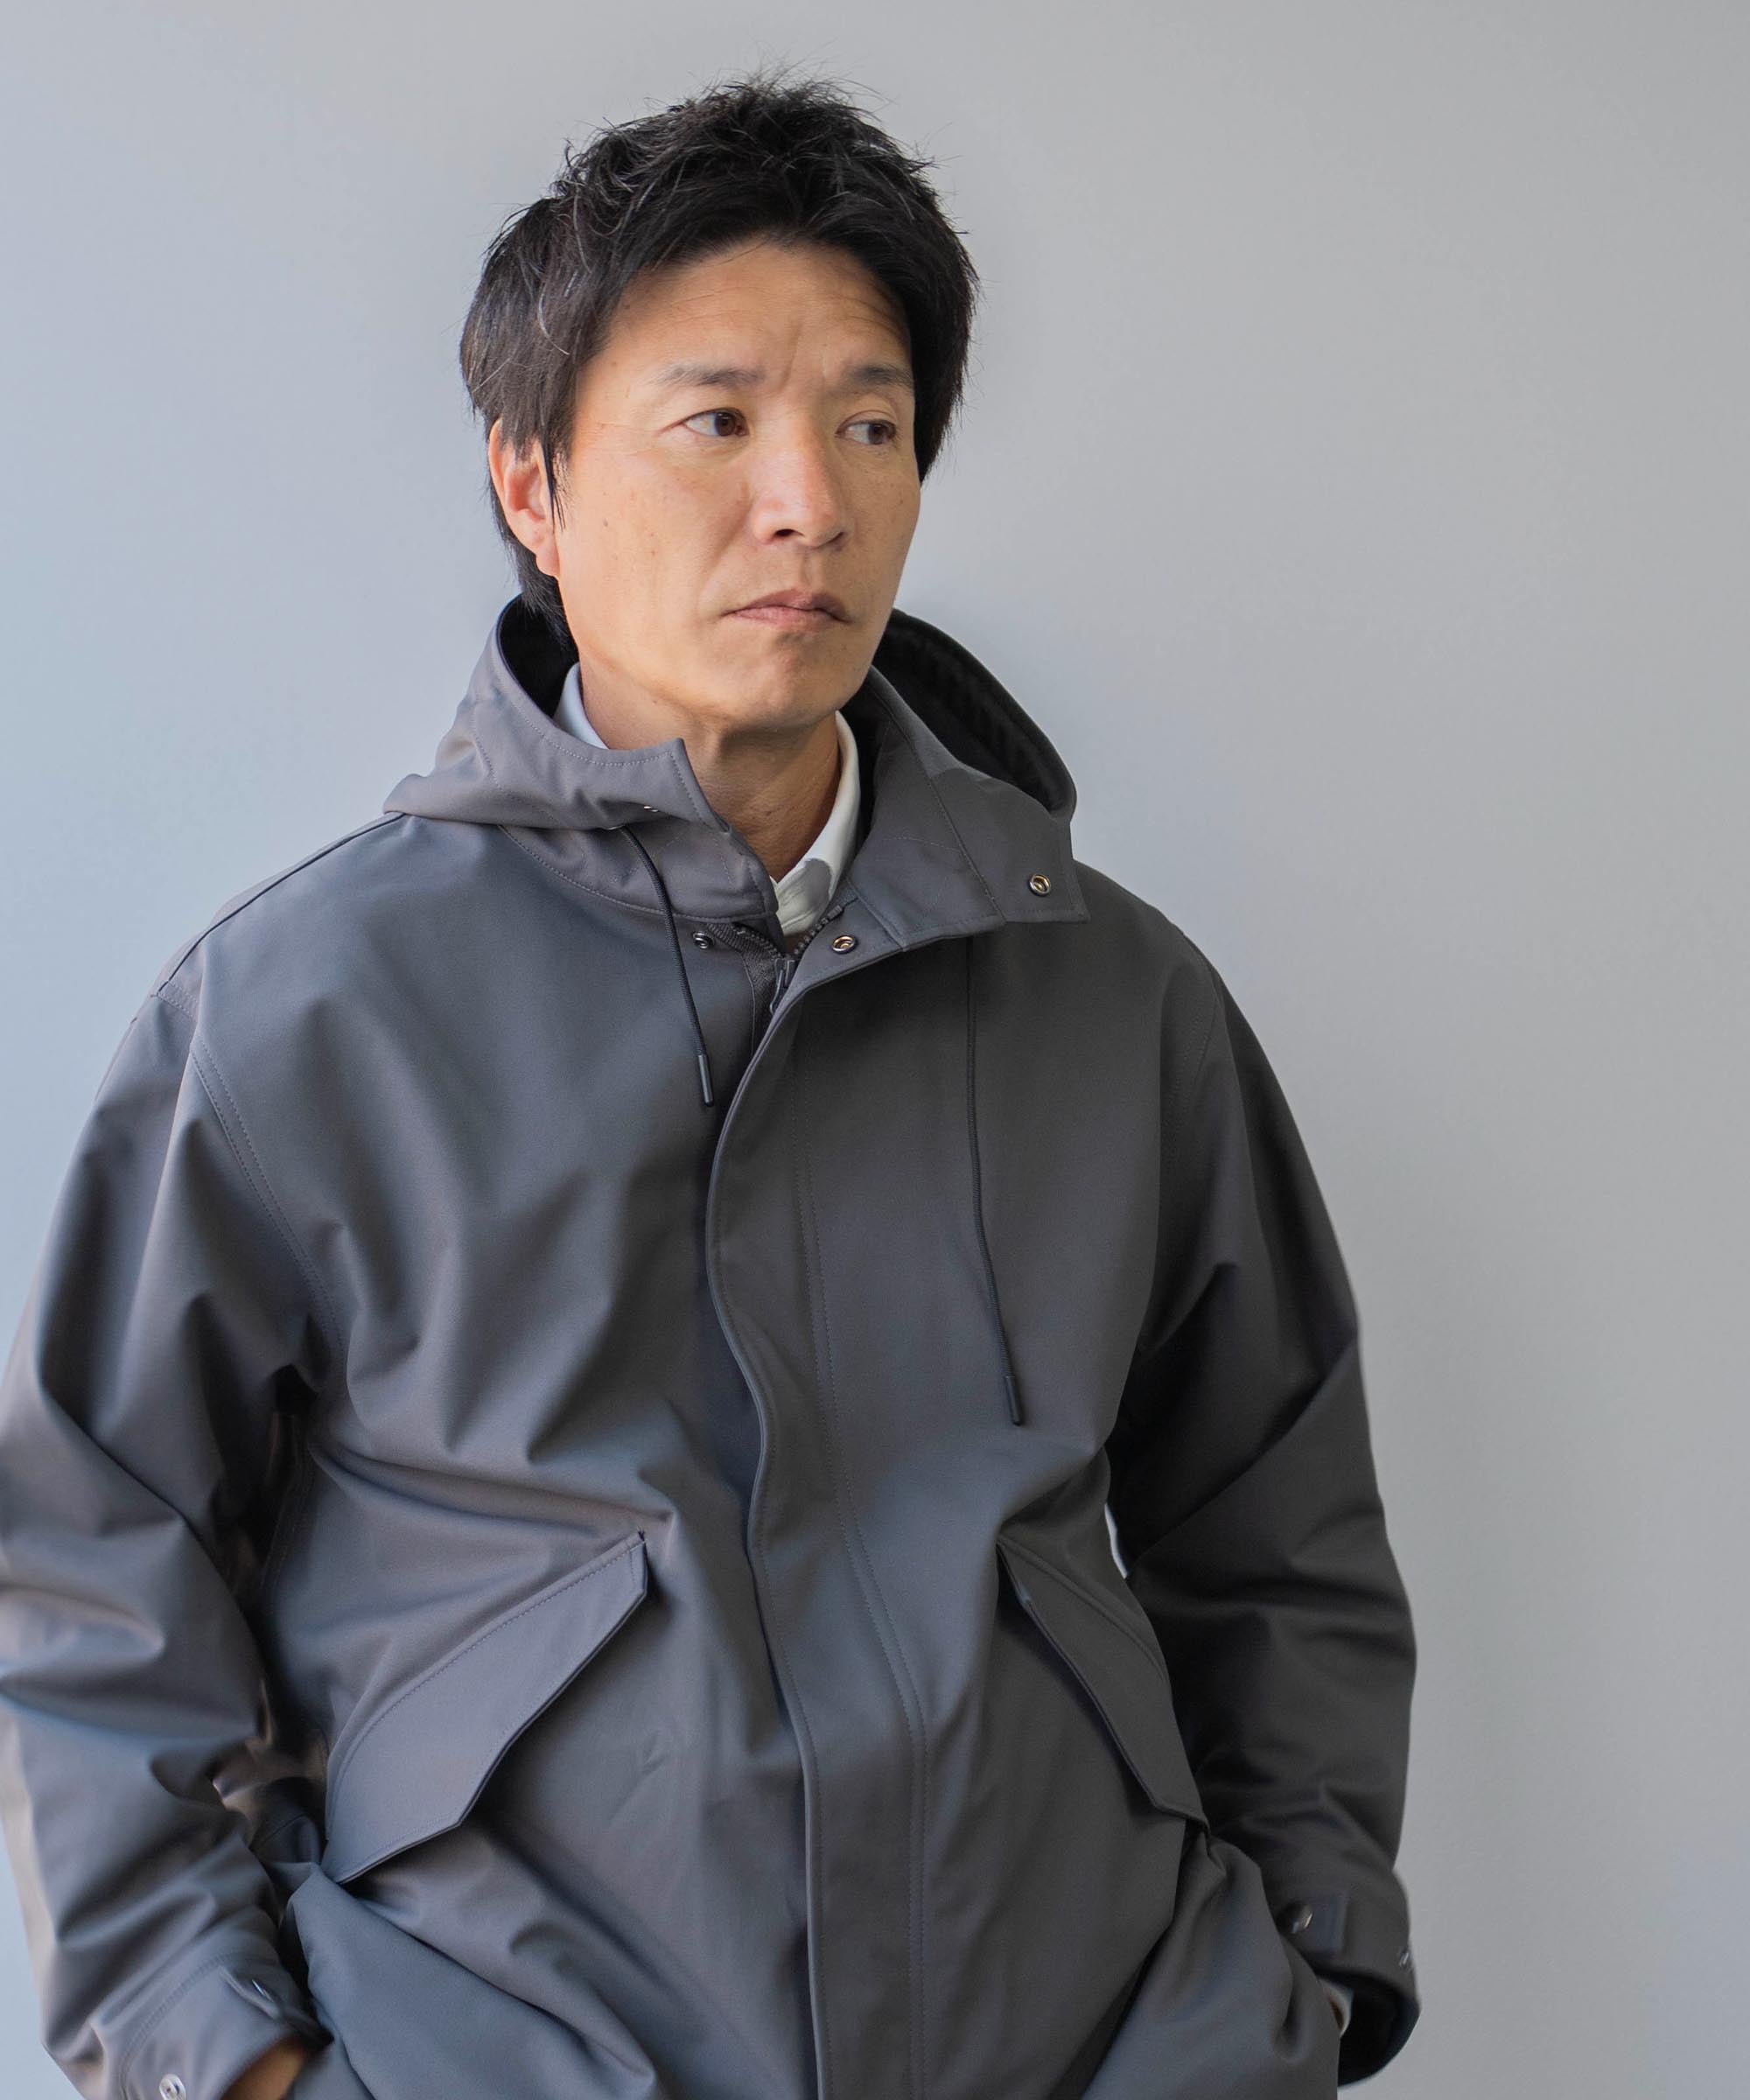 M-51 アーバン モッズコート -AWC | active worker components – AWC